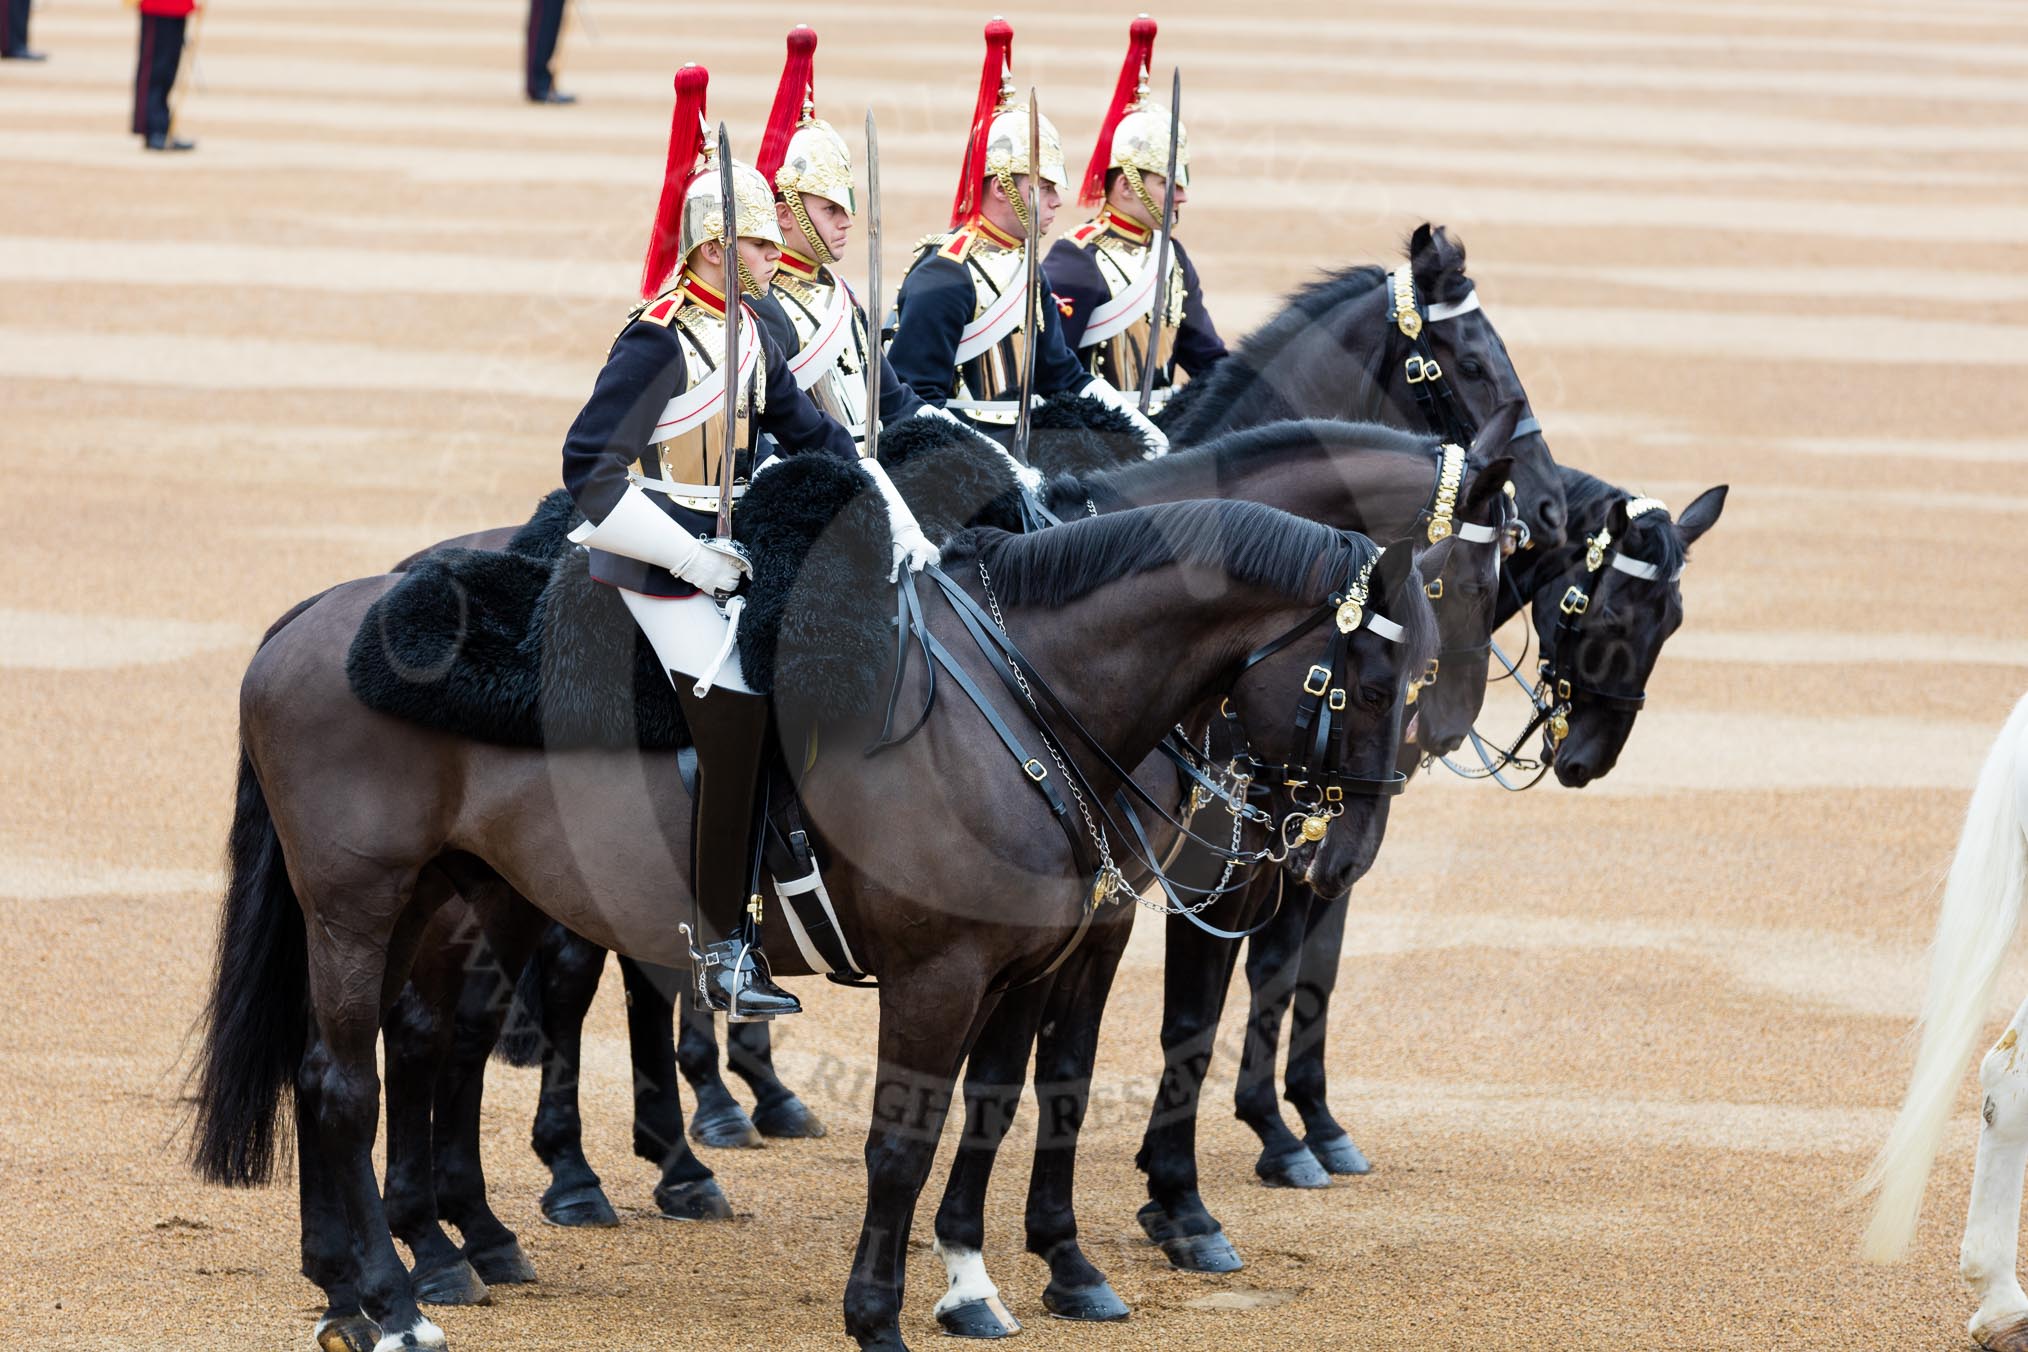 The Colonel's Review 2016.
Horse Guards Parade, Westminster,
London,

United Kingdom,
on 04 June 2016 at 10:58, image #152